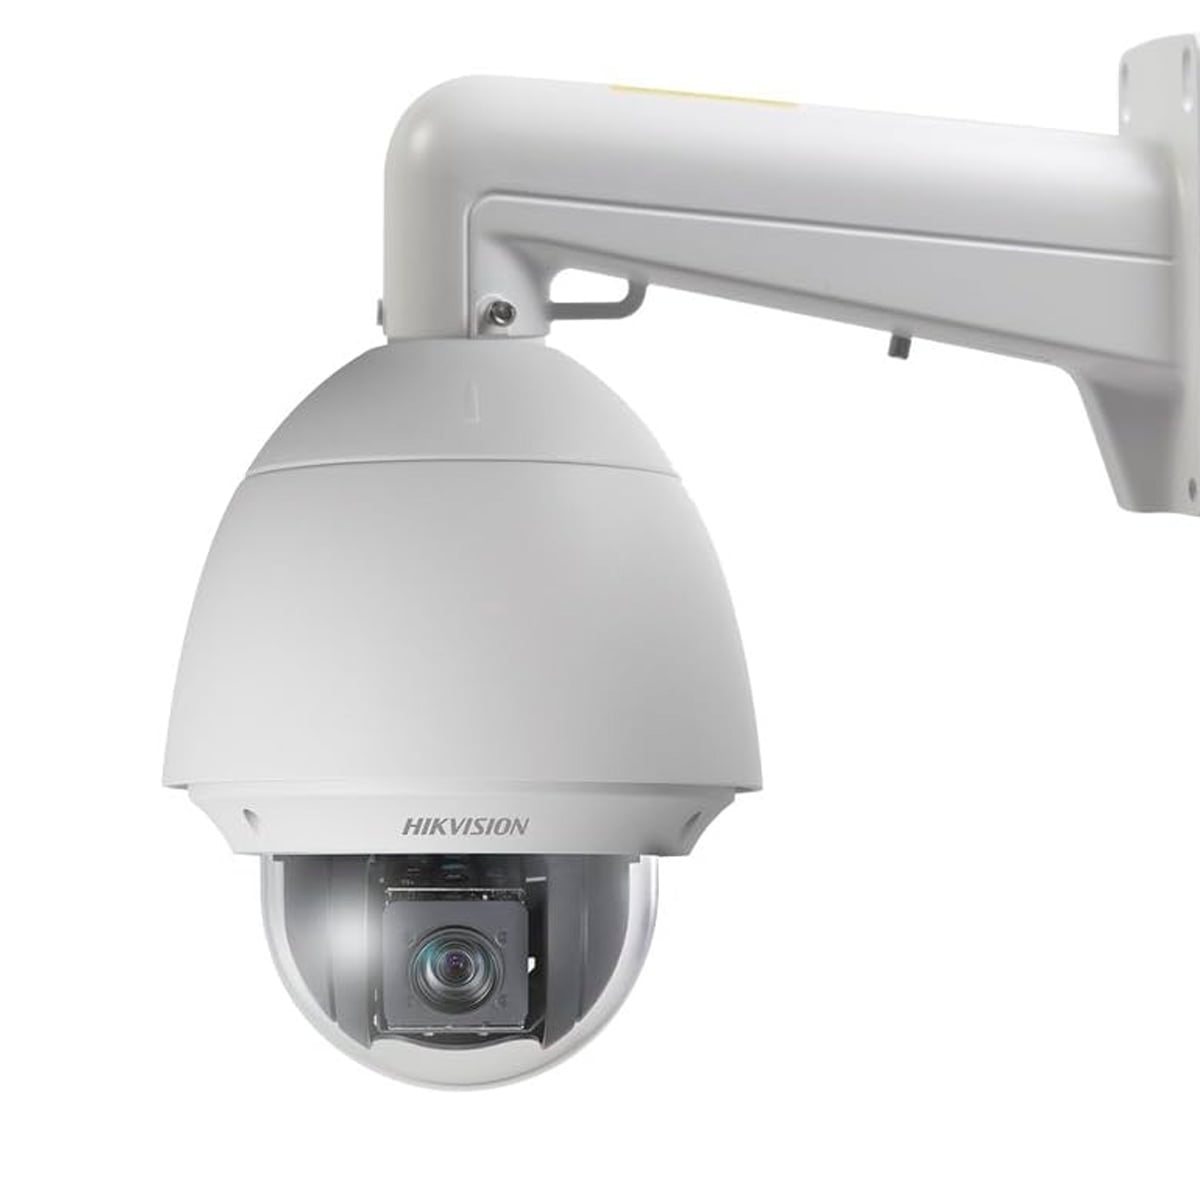 CAMERA-SPEED-DOME-IP-OUTDOOR-PTZ-2MP-30X-DS-2DE5230W-AE_4